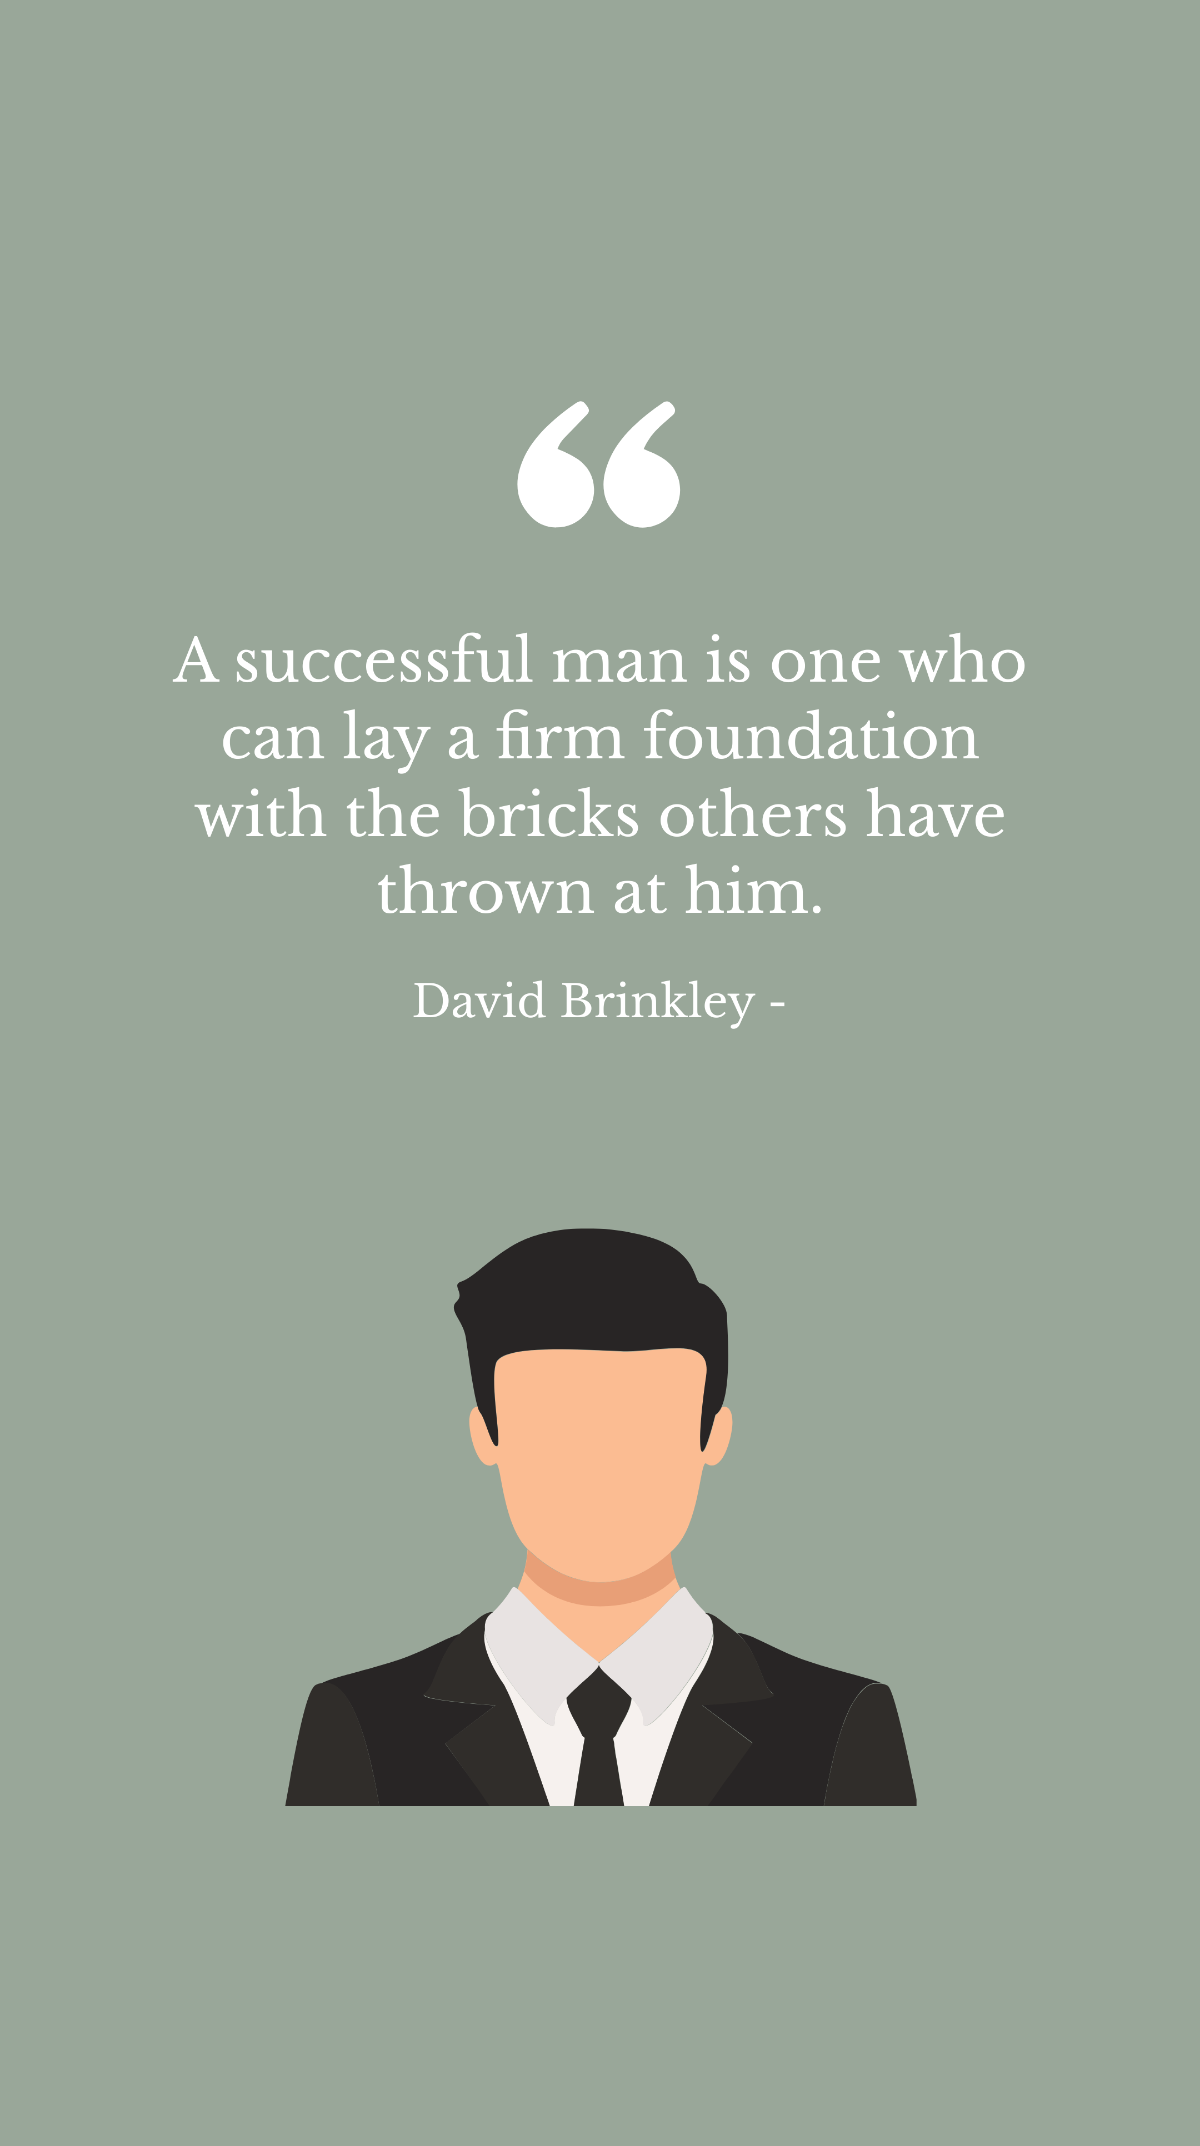 David Brinkley - A successful man is one who can lay a firm foundation with the bricks others have thrown at him. Template